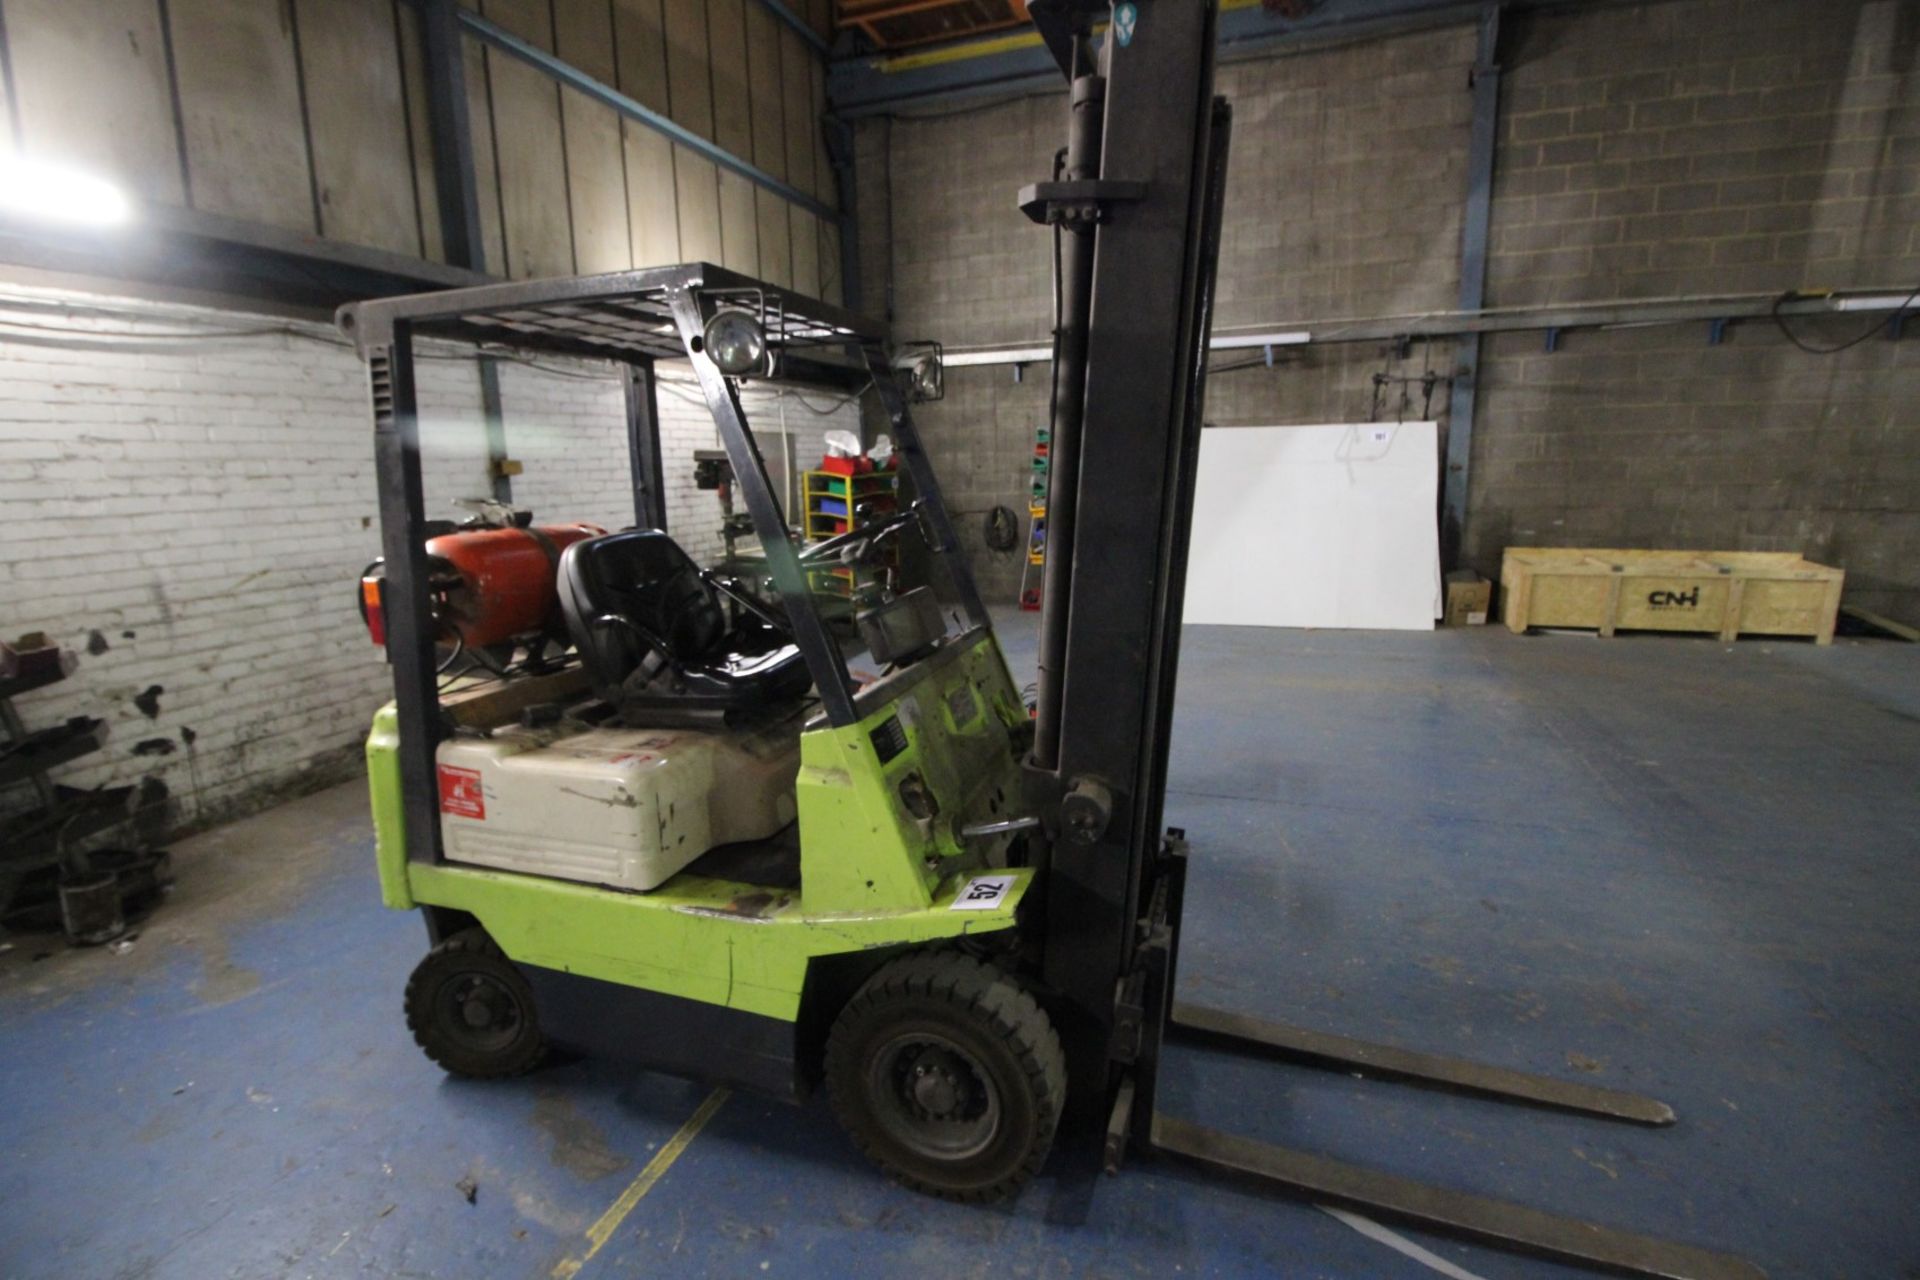 PUMA MODEL FG15, 1.5T CAPACITY FORKLIFT, MANUFACTURED 1992, LPG-FIRED, SERIAL NO. T10293, 4,374